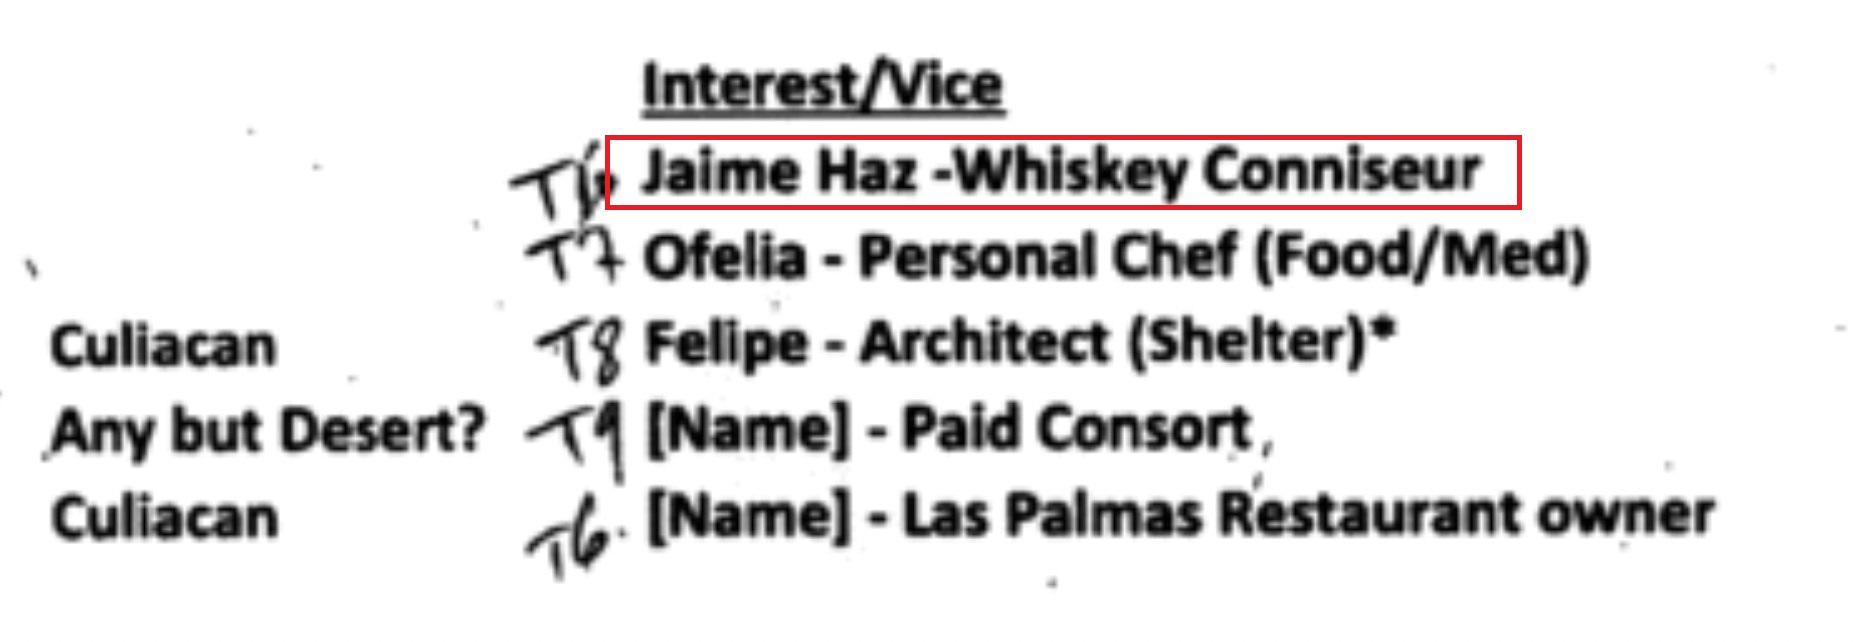 In the documents, the name Jaime Haz appears as a whiskey expert (Photo: Twitter/@oscarbalmen)